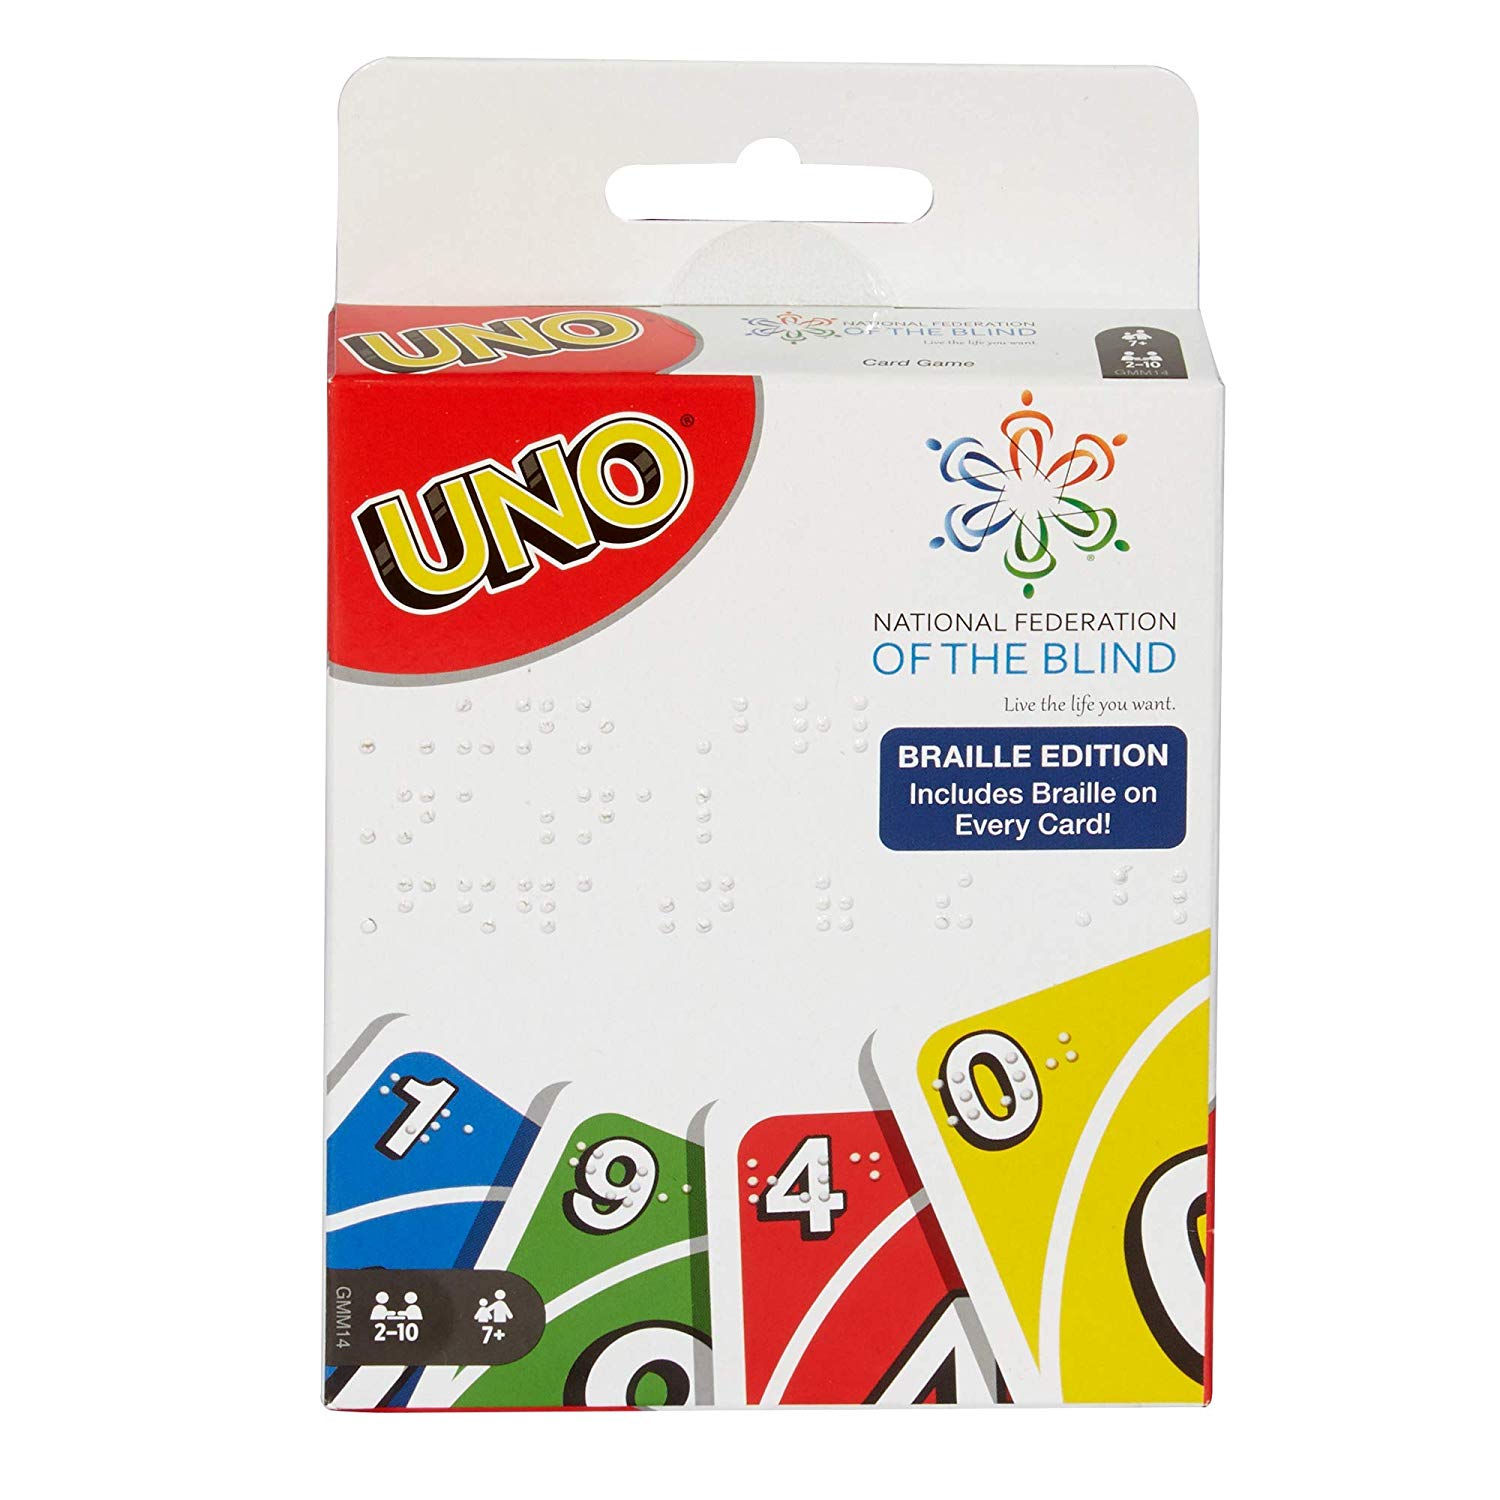 A set of UNO card game that comes with Braille featured on every card.